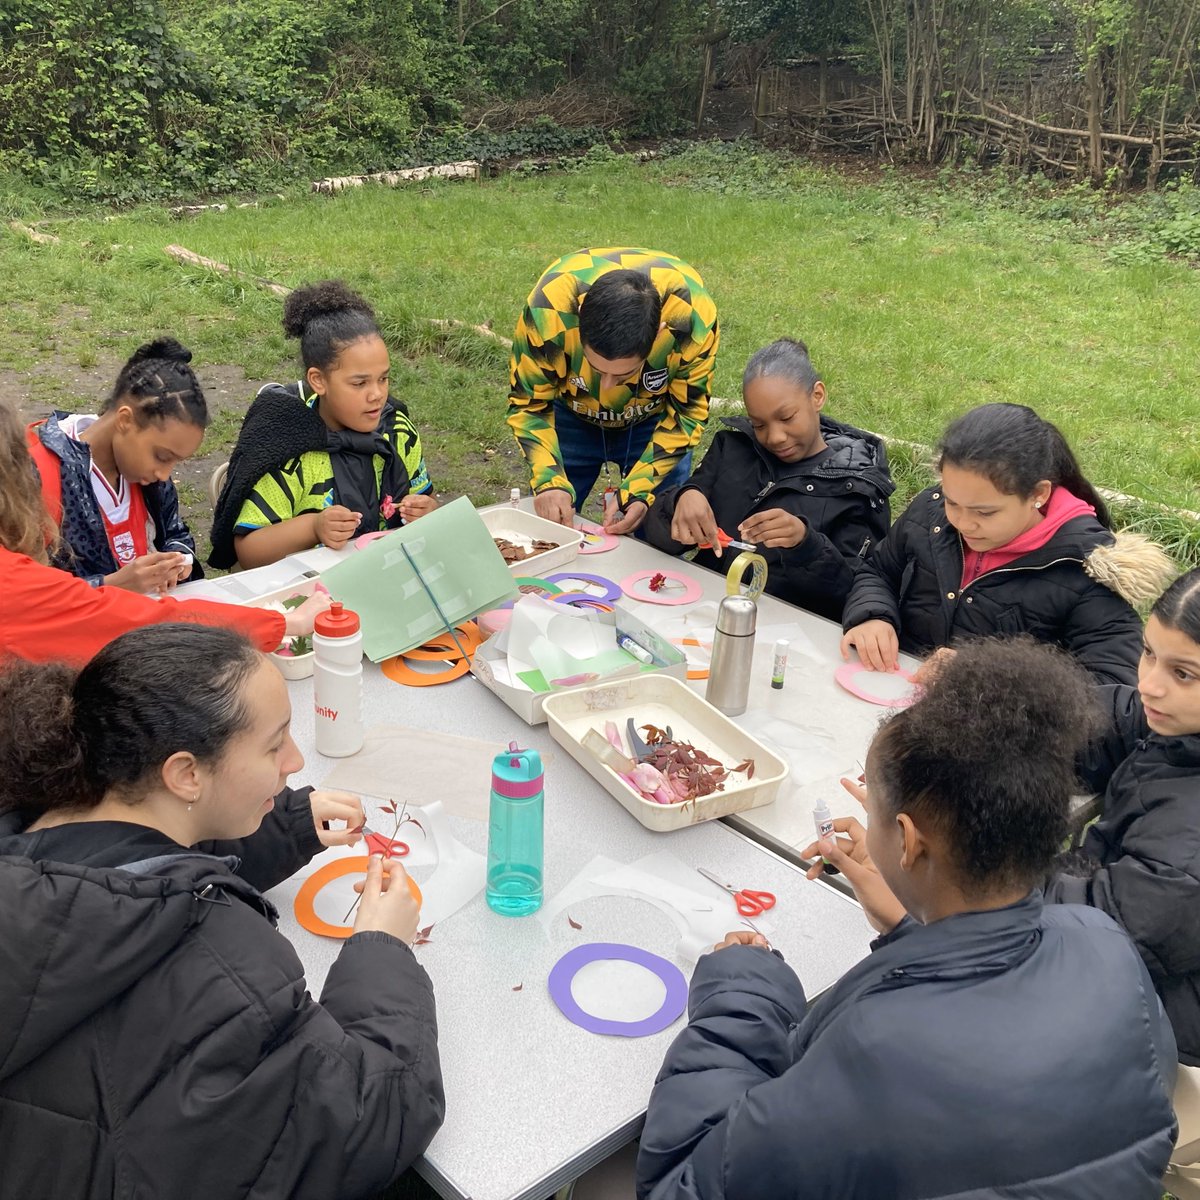 ⚽️🌱Today our PL PFA Double Club Camp took a break from football to visit the Ecology Centre! 🍃Thanks to the amazing staff our girls learnt about permaculture and looking after our planet! @IslingtonLife @IslingtonBC #DoubleClubIs25 #PLPFACommunityFund